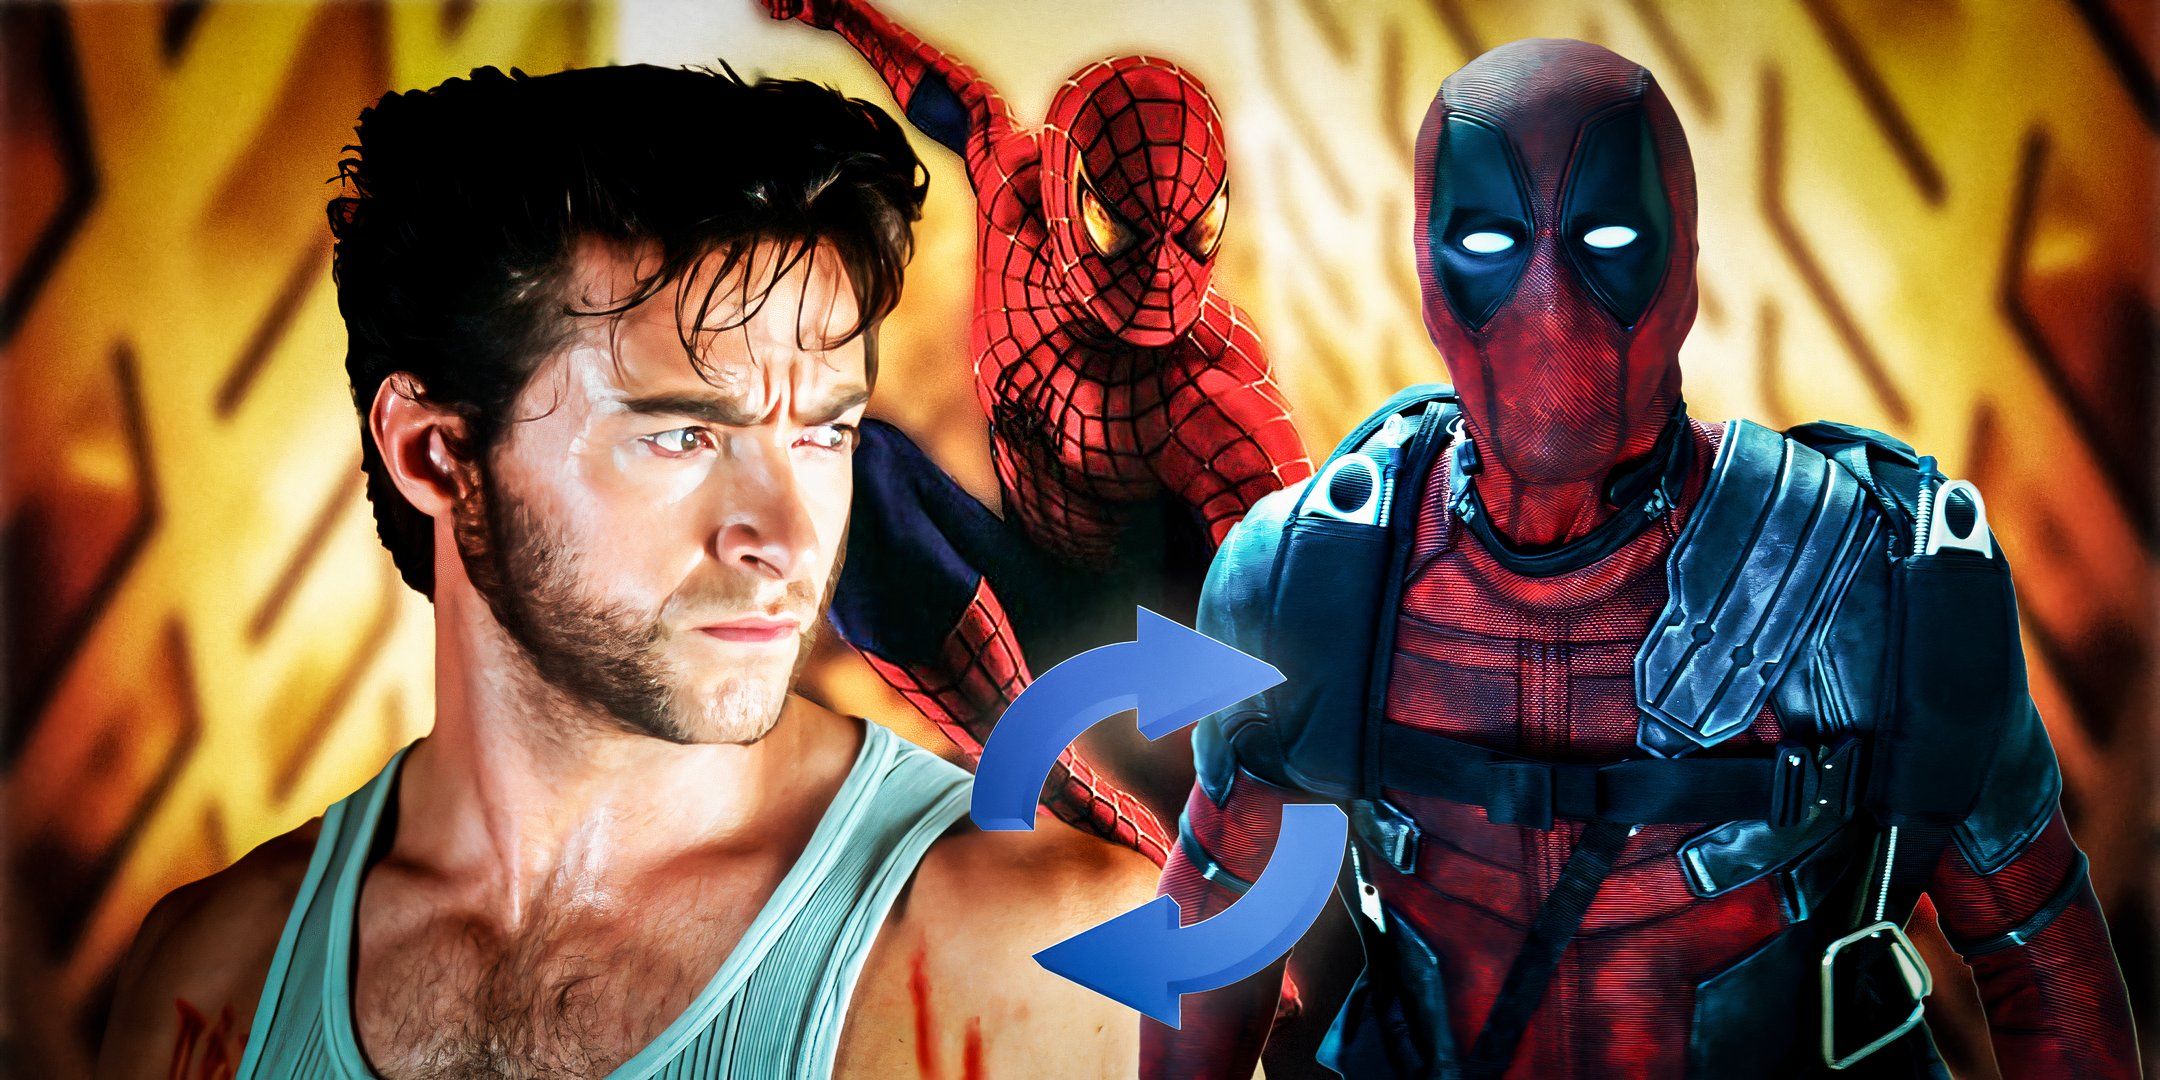 Hugh-Jackman as-Logan/Wolverine from X2, spider-man from Raimi's Spider-man, and Deadpool from Deadpool 2